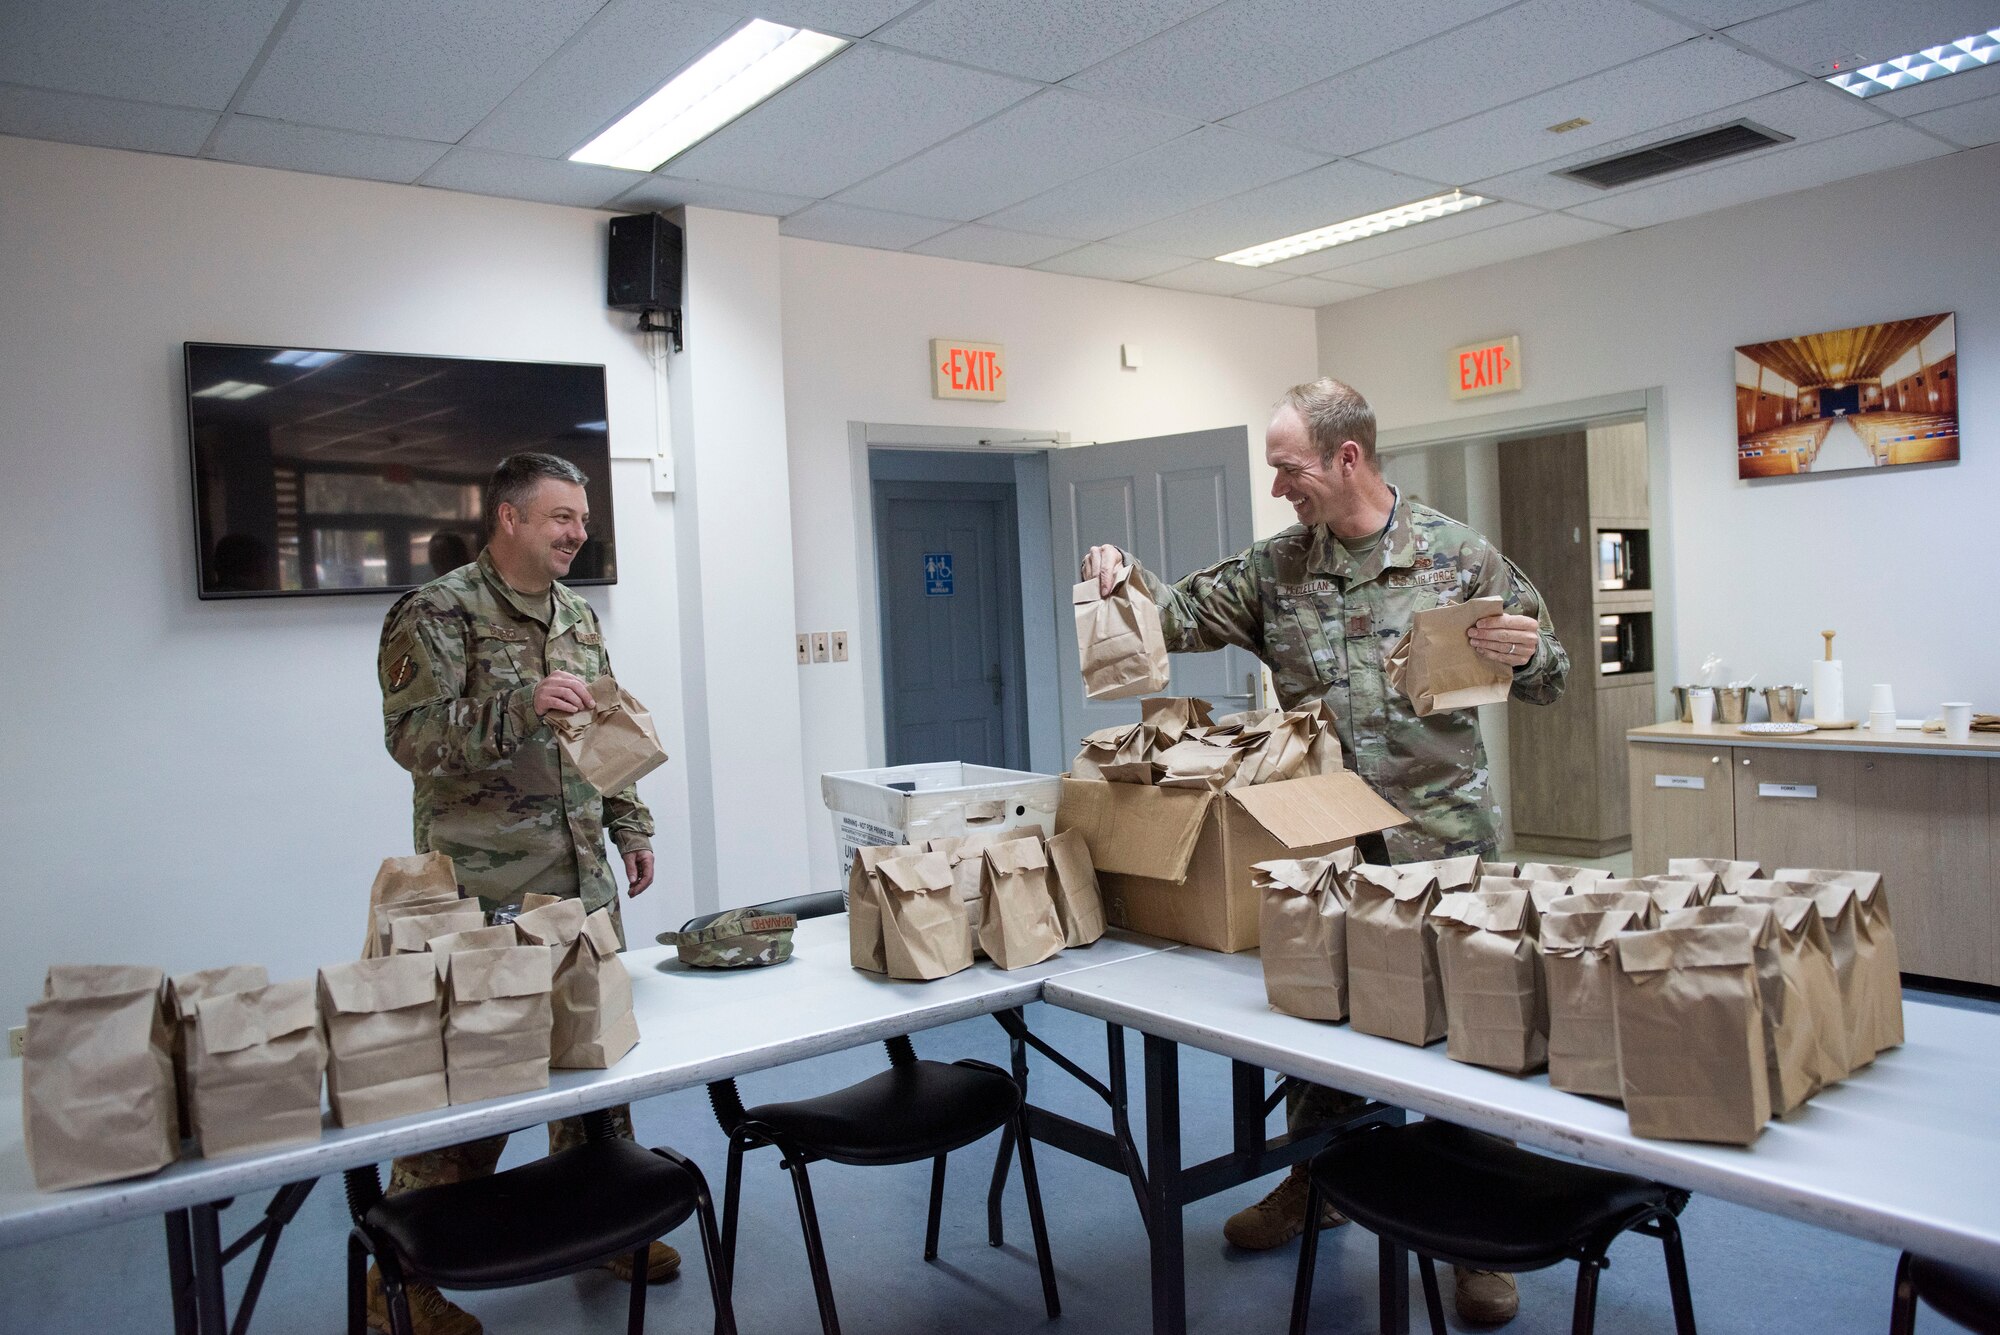 U.S. Air Force Staff Sgt. Jason Bravard, 39th Air Base Wing chapel non-commissioned officer in charge of resource management, (left), and U.S. Air Force Capt. Samuel McClellan, a chaplain, prepare care packages April 14, 2020, at Incirlik Air Base, Turkey. The 39th ABW chapel assembled care packages with their contact information attached in order to help community members reach out to them during the COVID-19 pandemic. (U.S. Air Force photo by Staff Sgt. Joshua Magbanua)